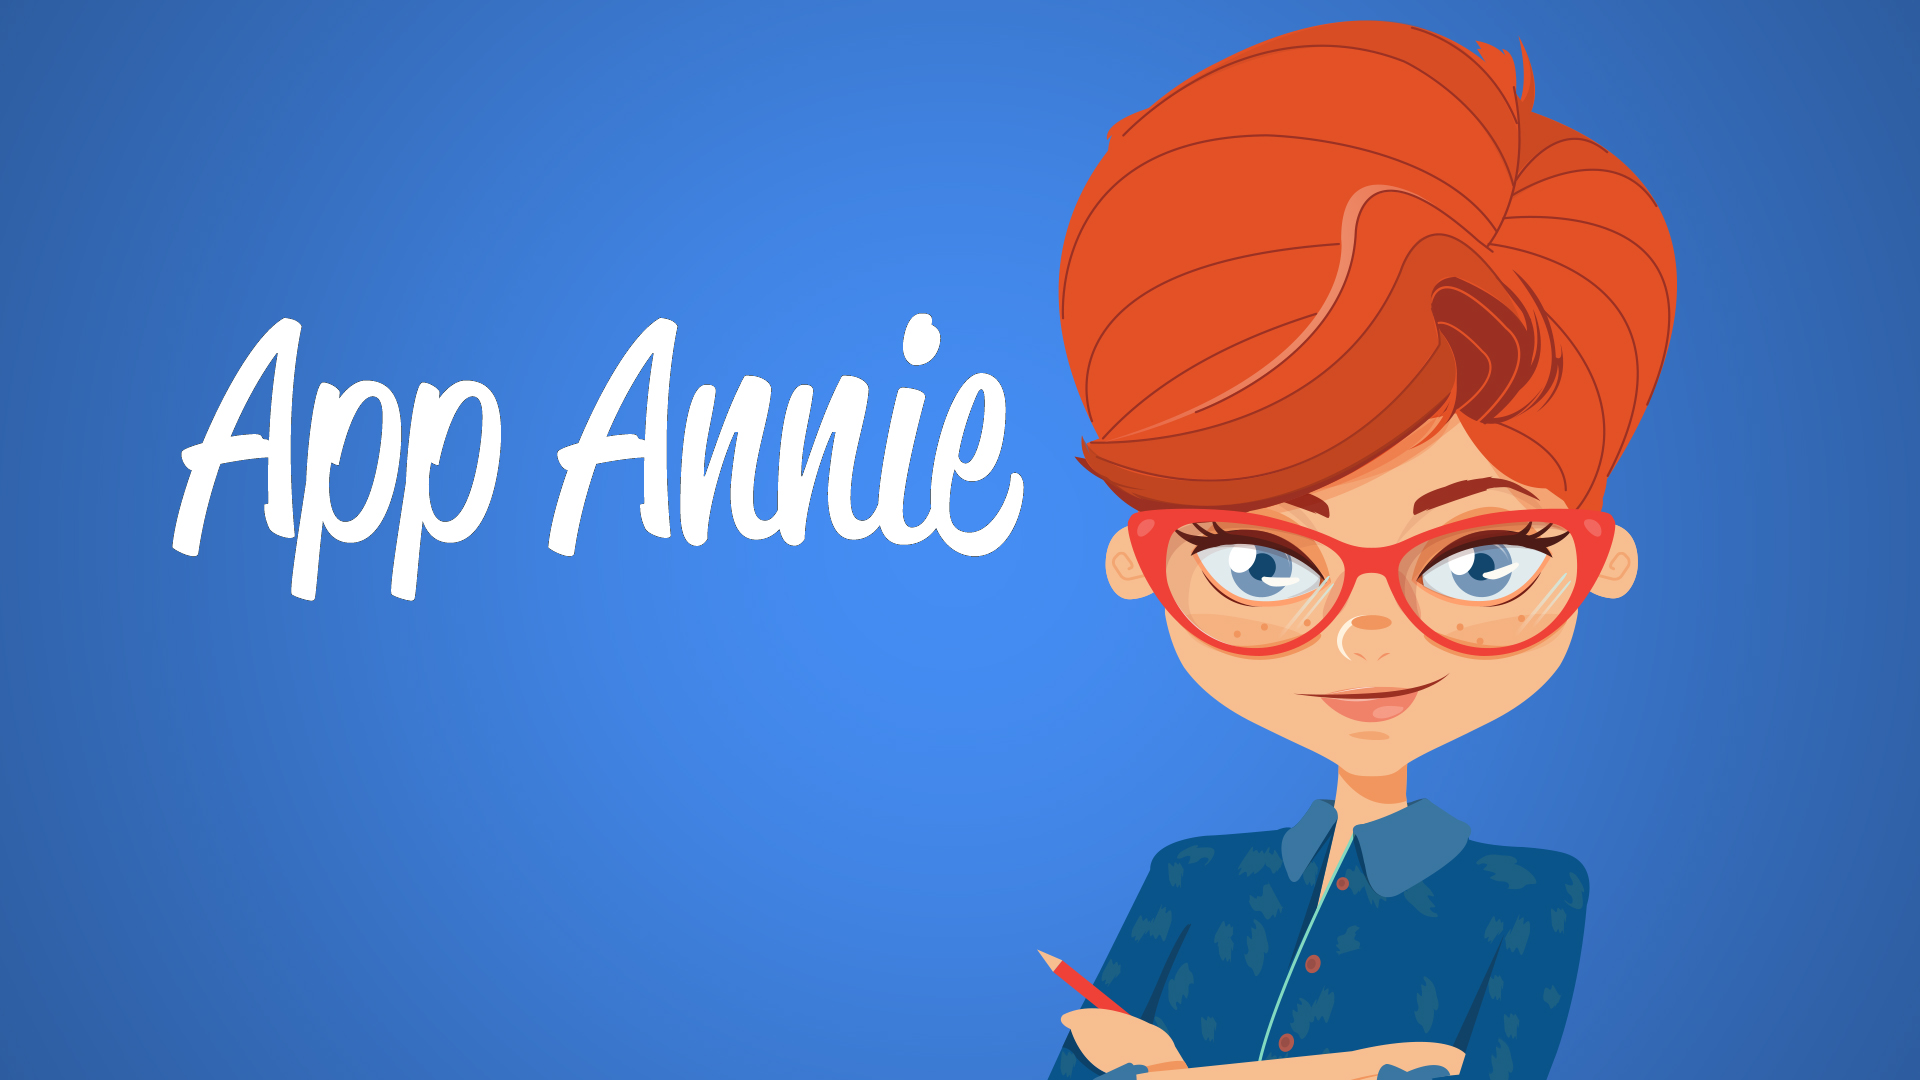 App data firm App Annie adds advertising analytics with AppScotch acquisition